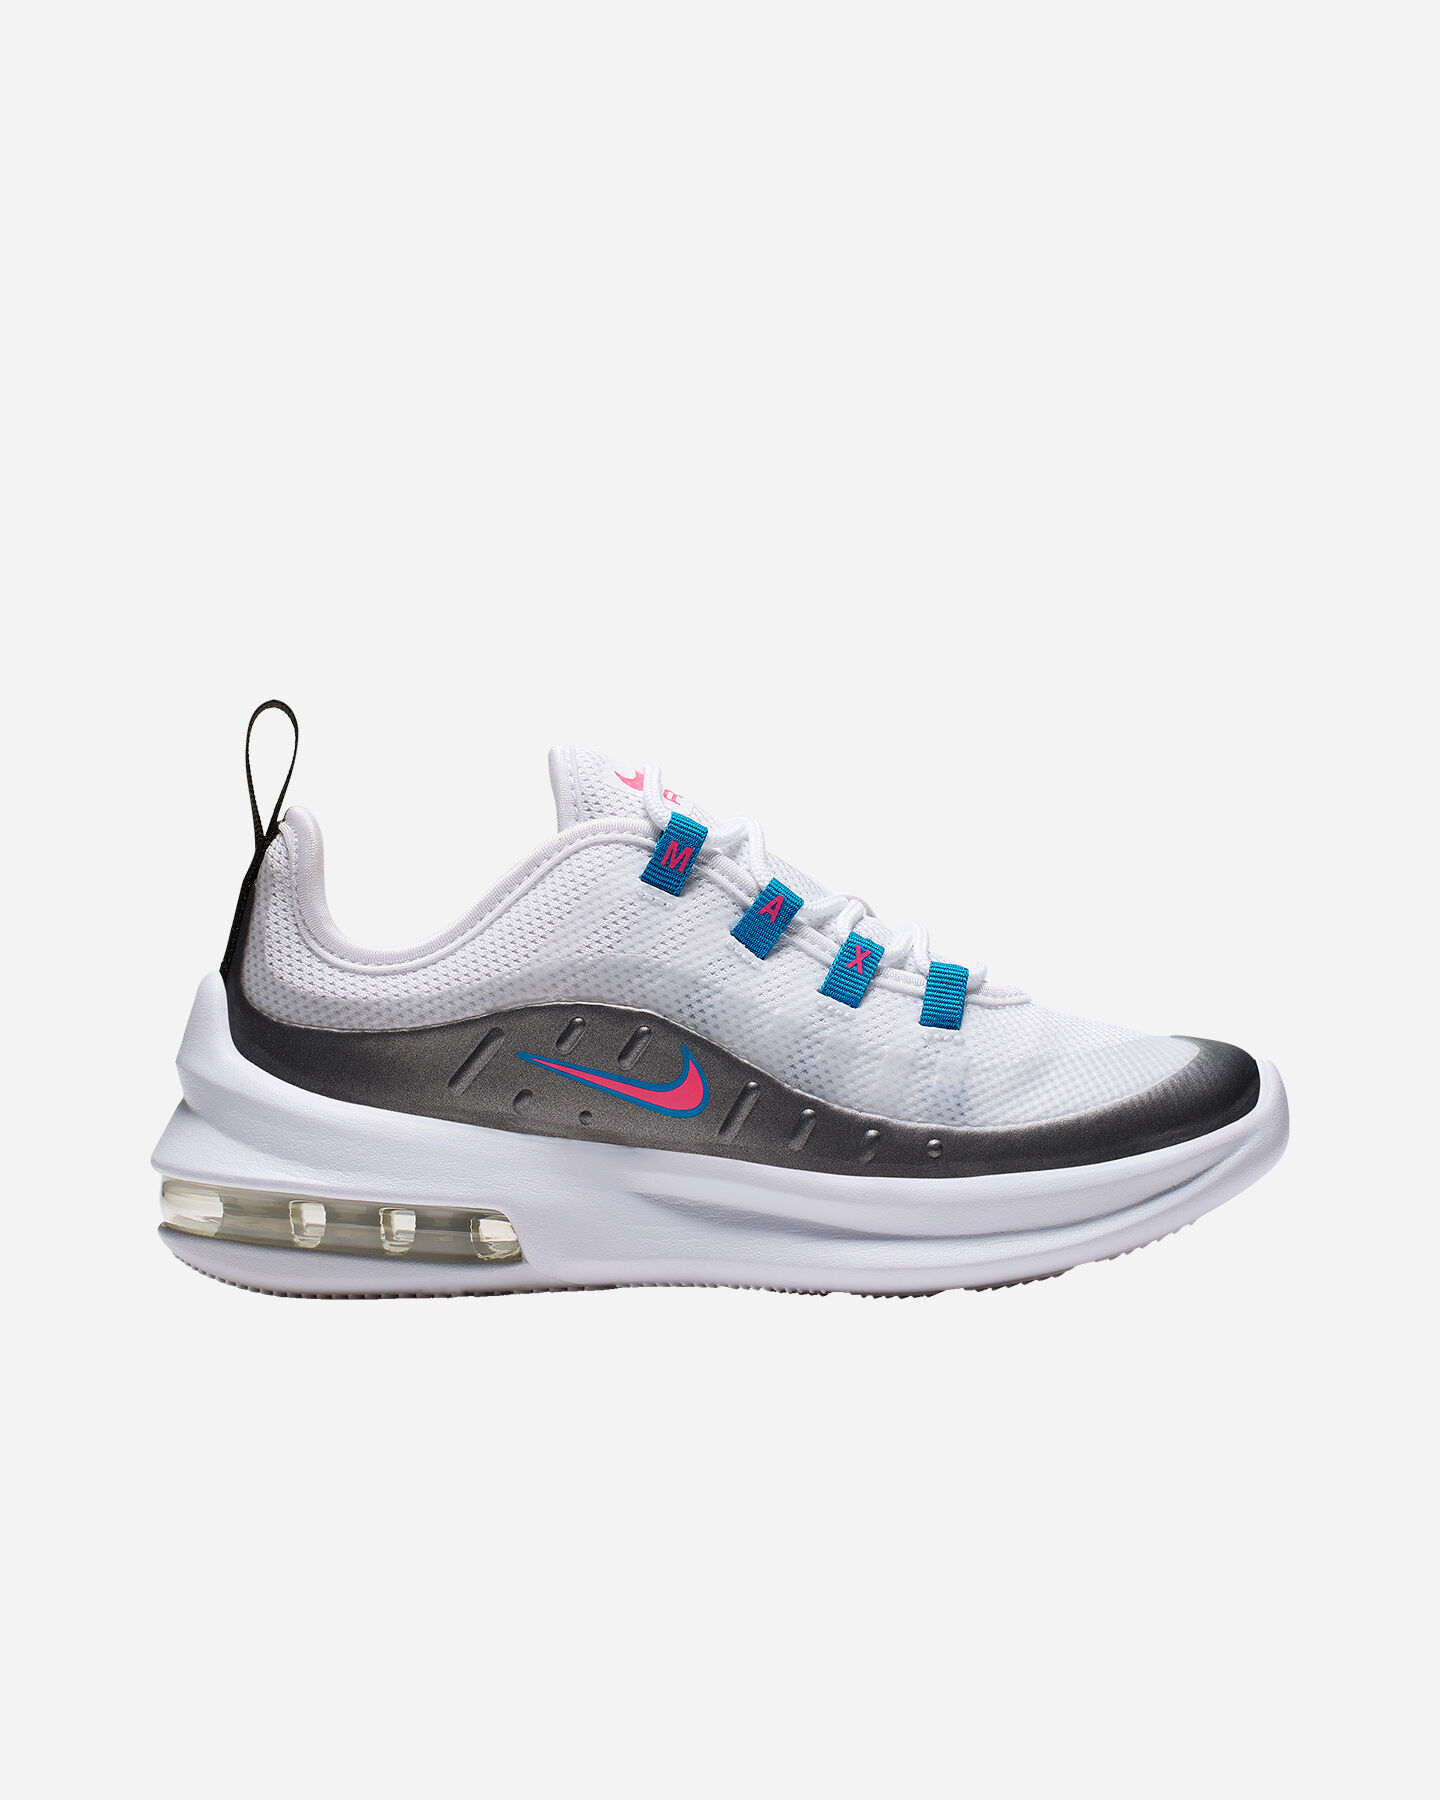 nike air max 97 cisalfa buy clothes shoes online